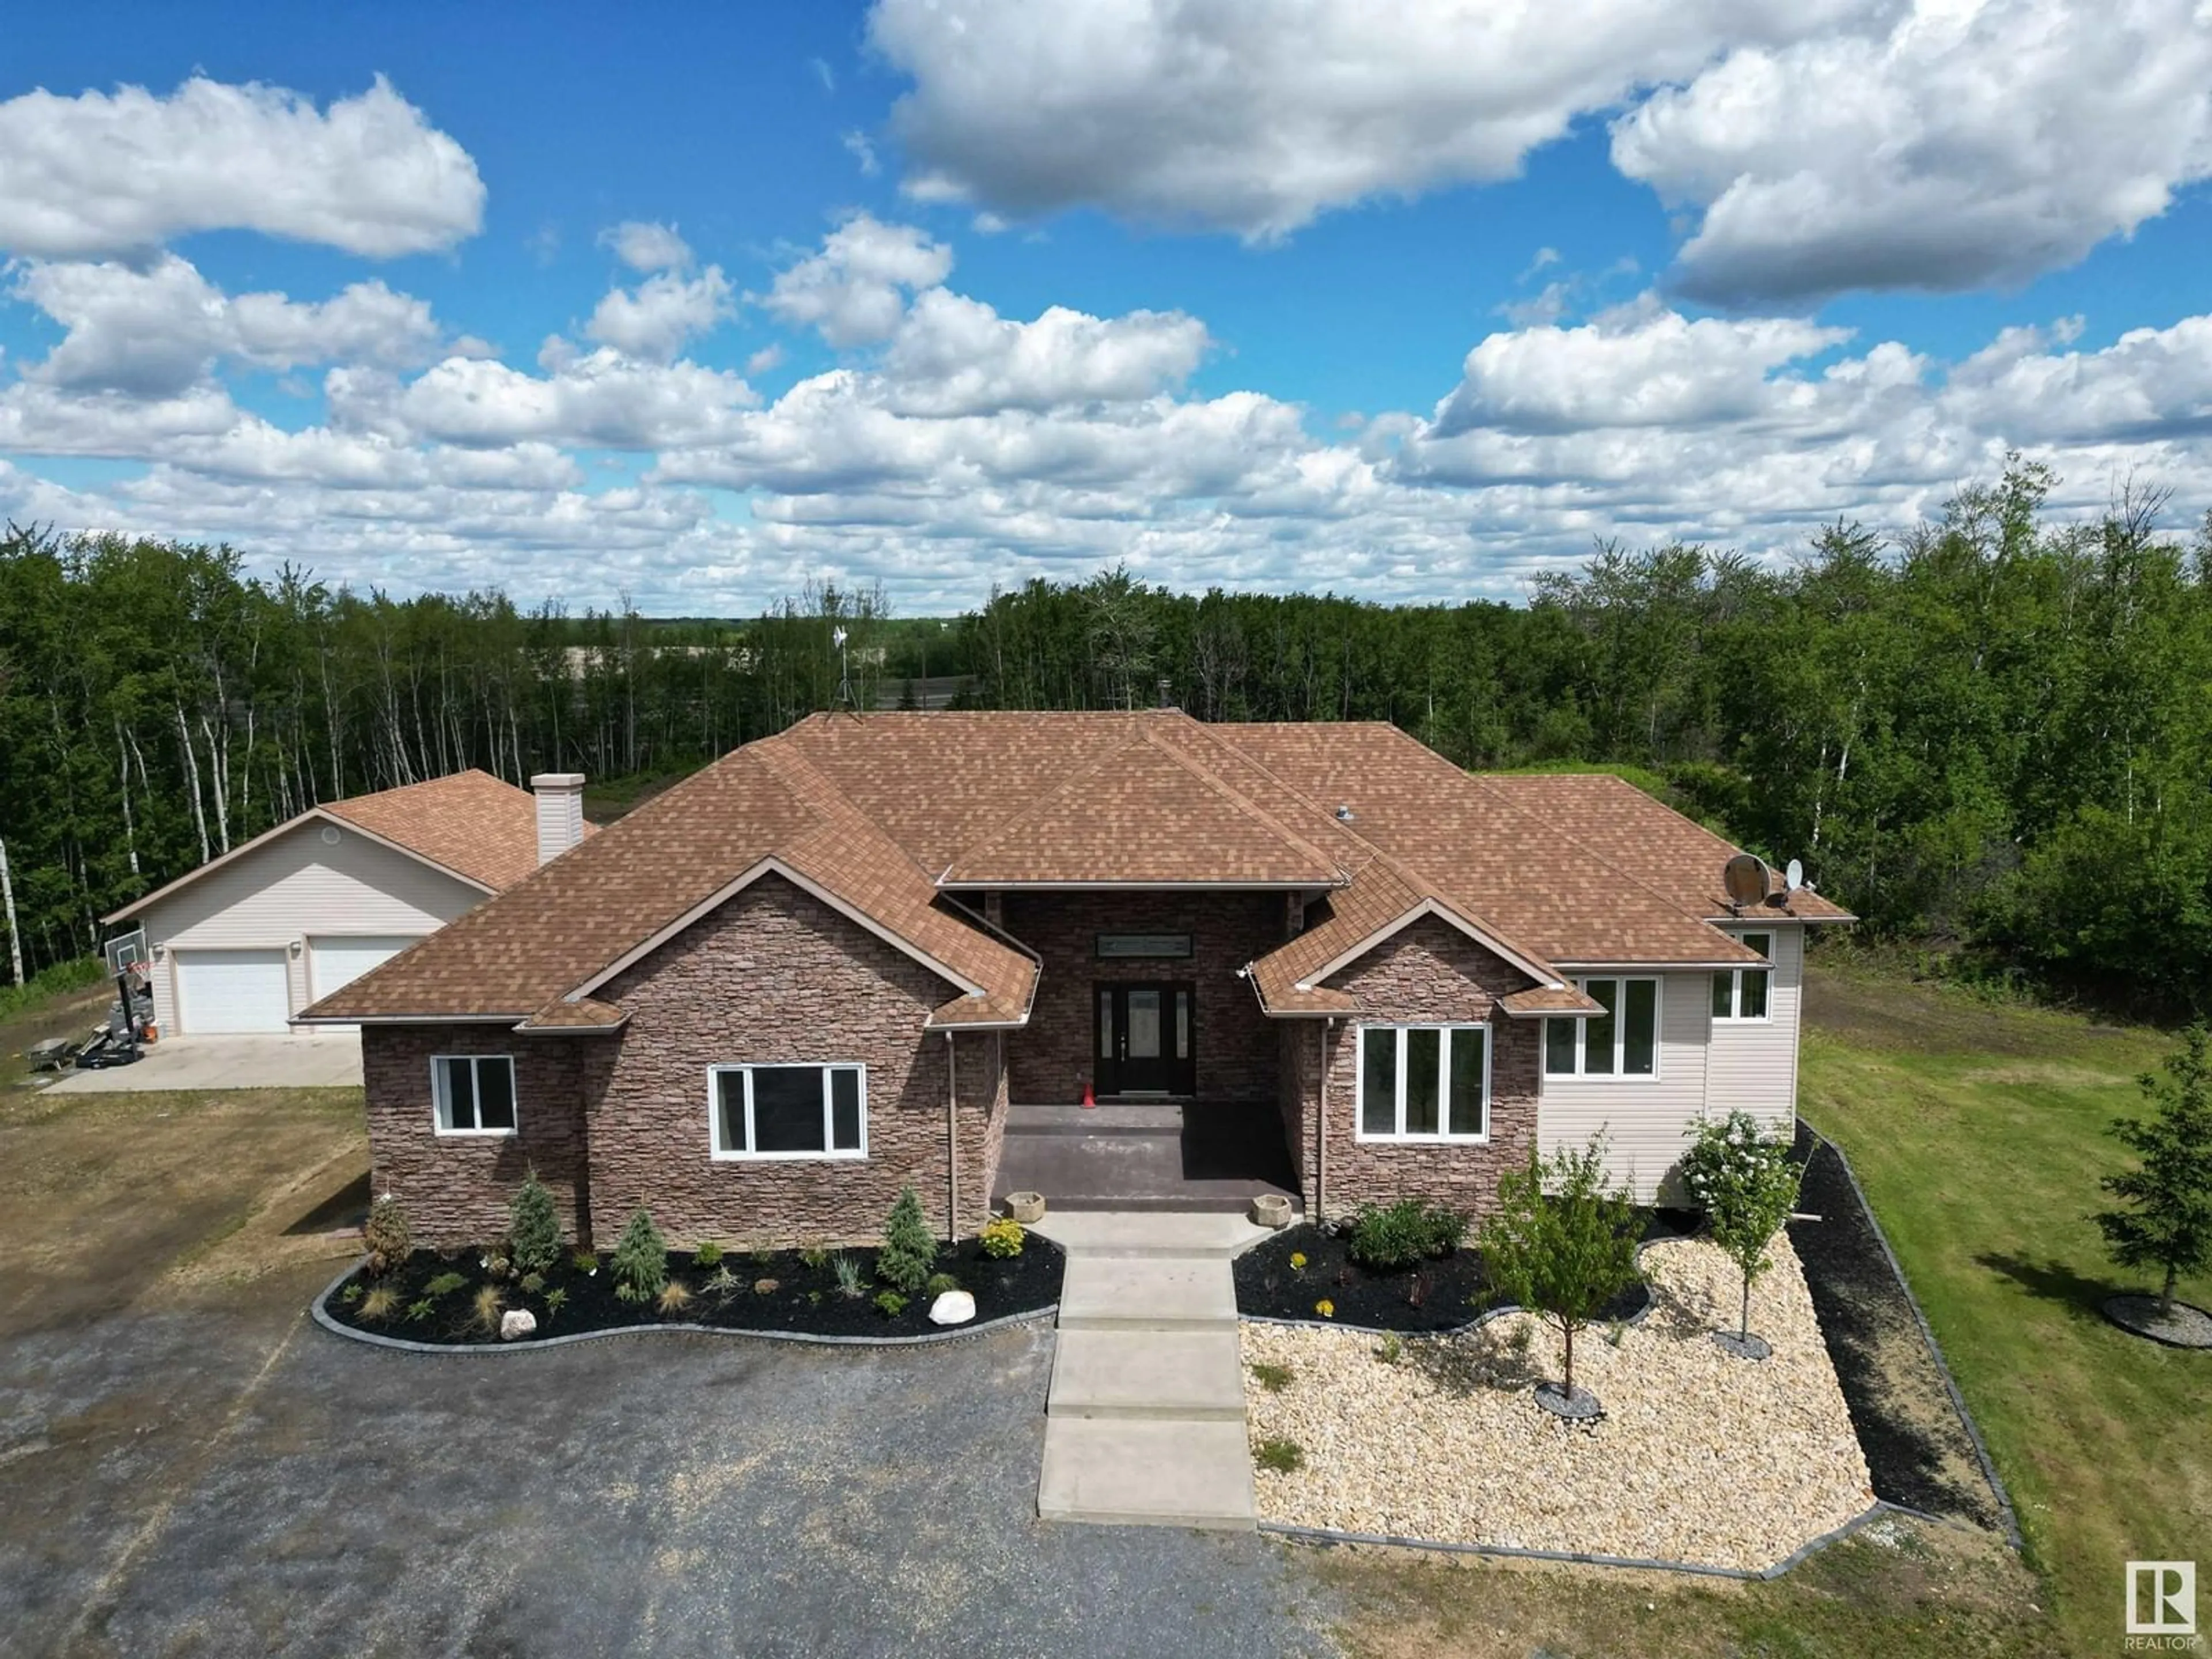 Home with brick exterior material for 330 50150 Rge Rd 232, Rural Leduc County Alberta T4R0K8